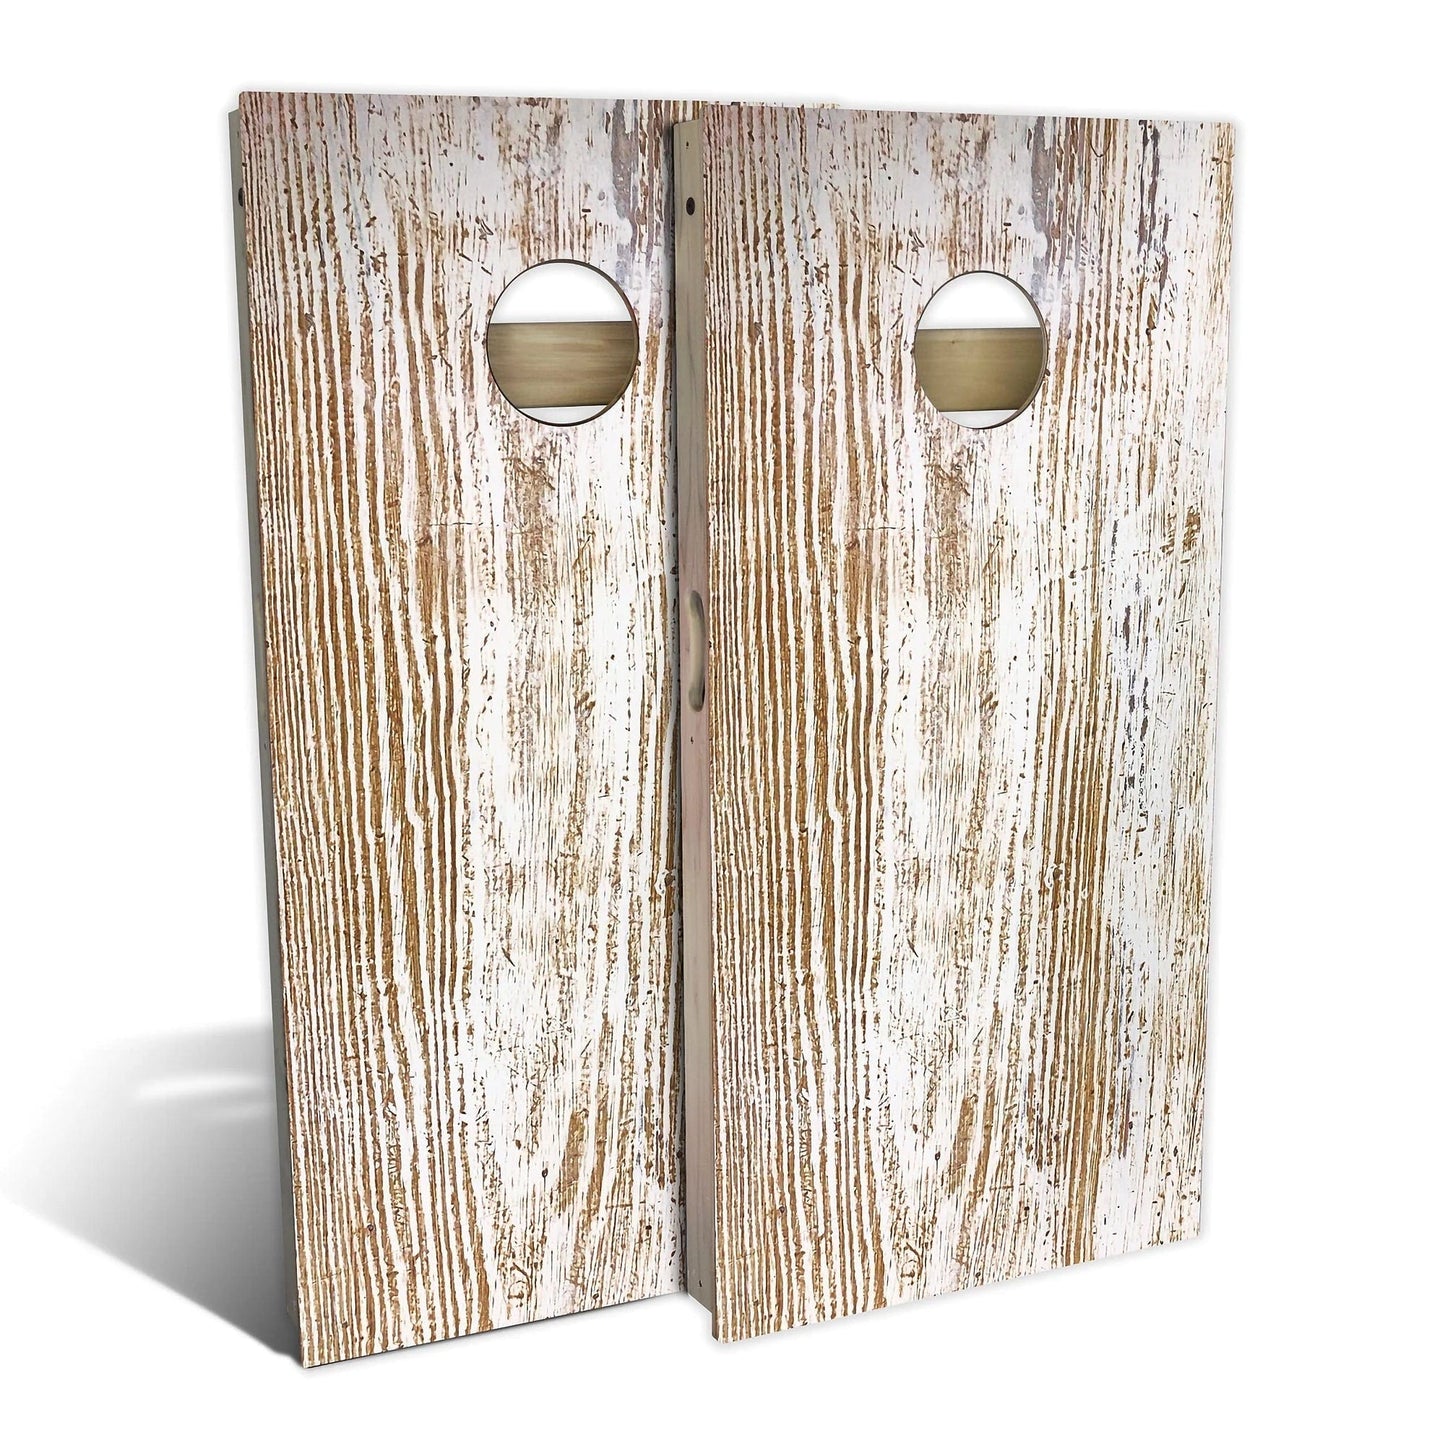 Country Living Rustic White Cornhole Boards